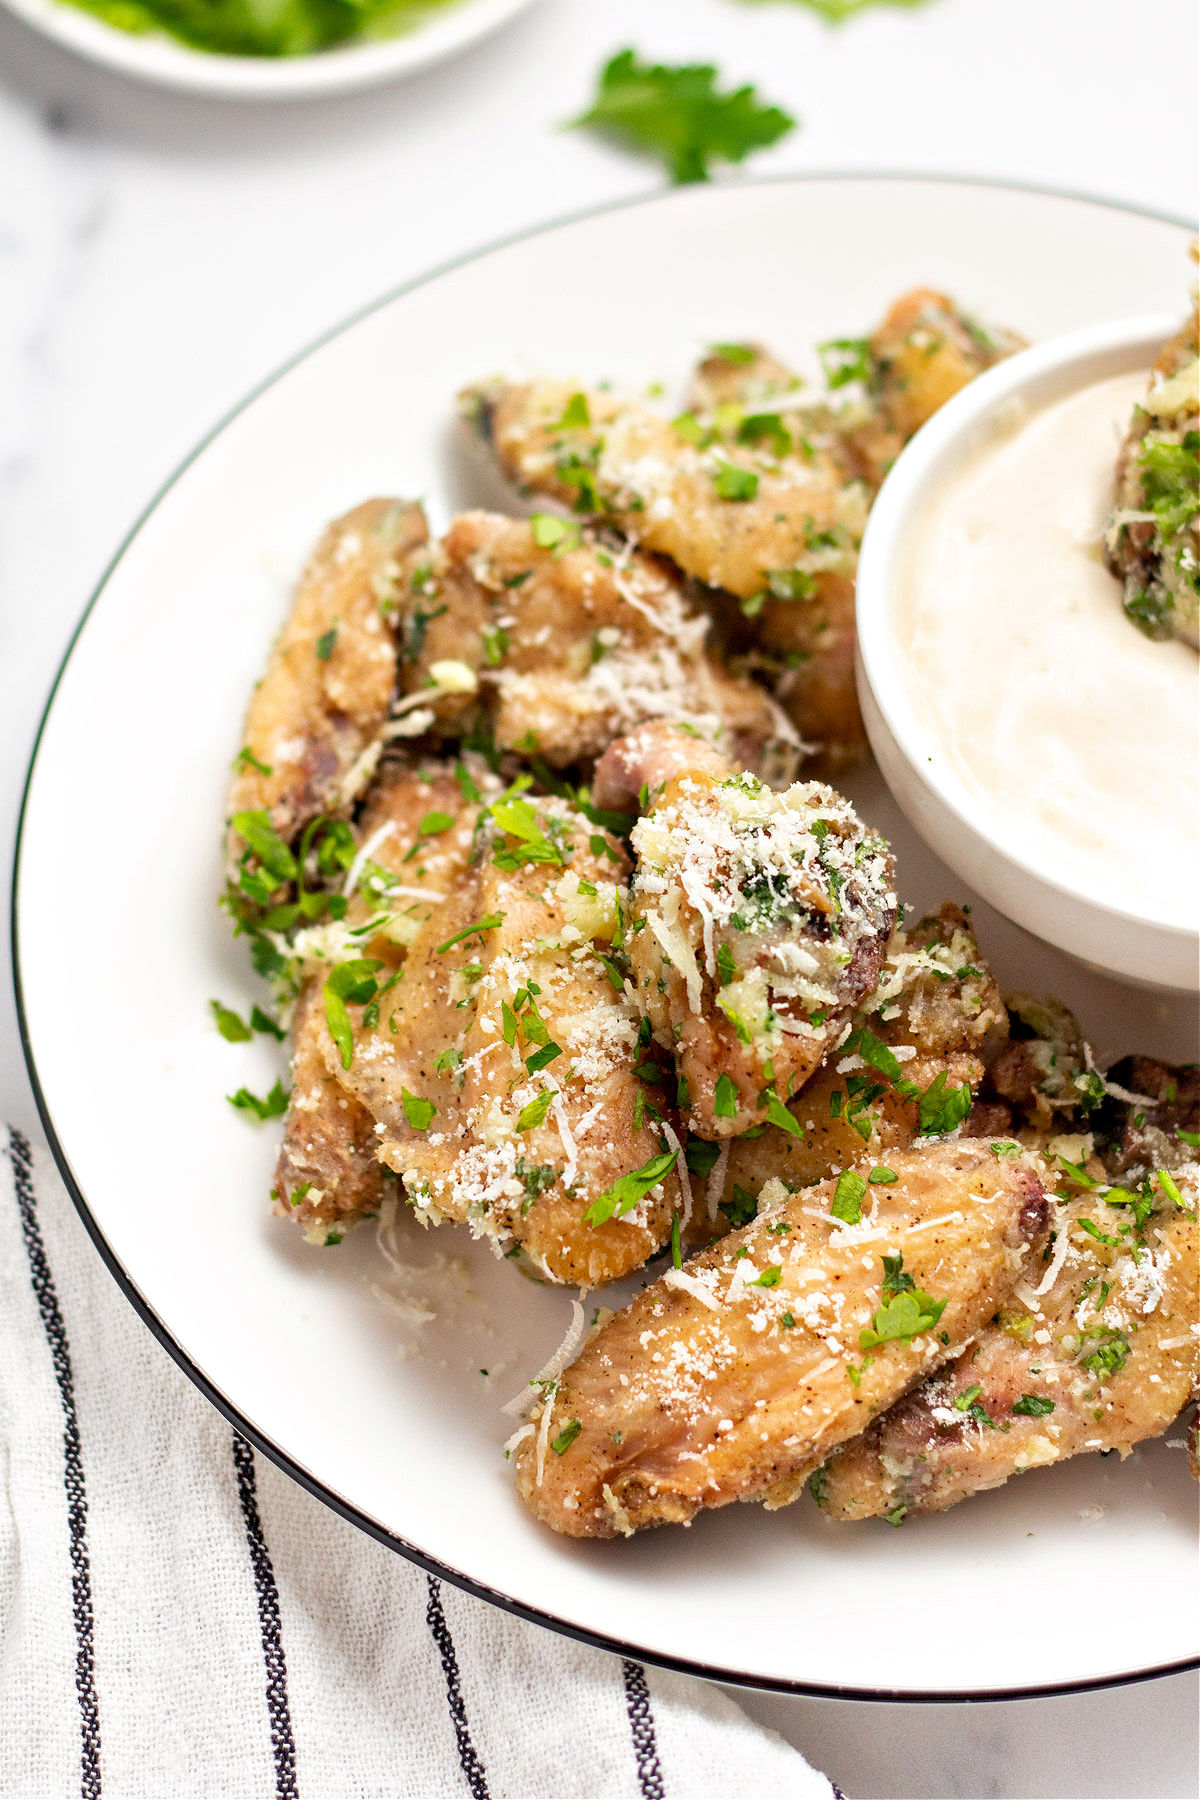 Garlic parmesan chicken wings with homemade ranch dressing.